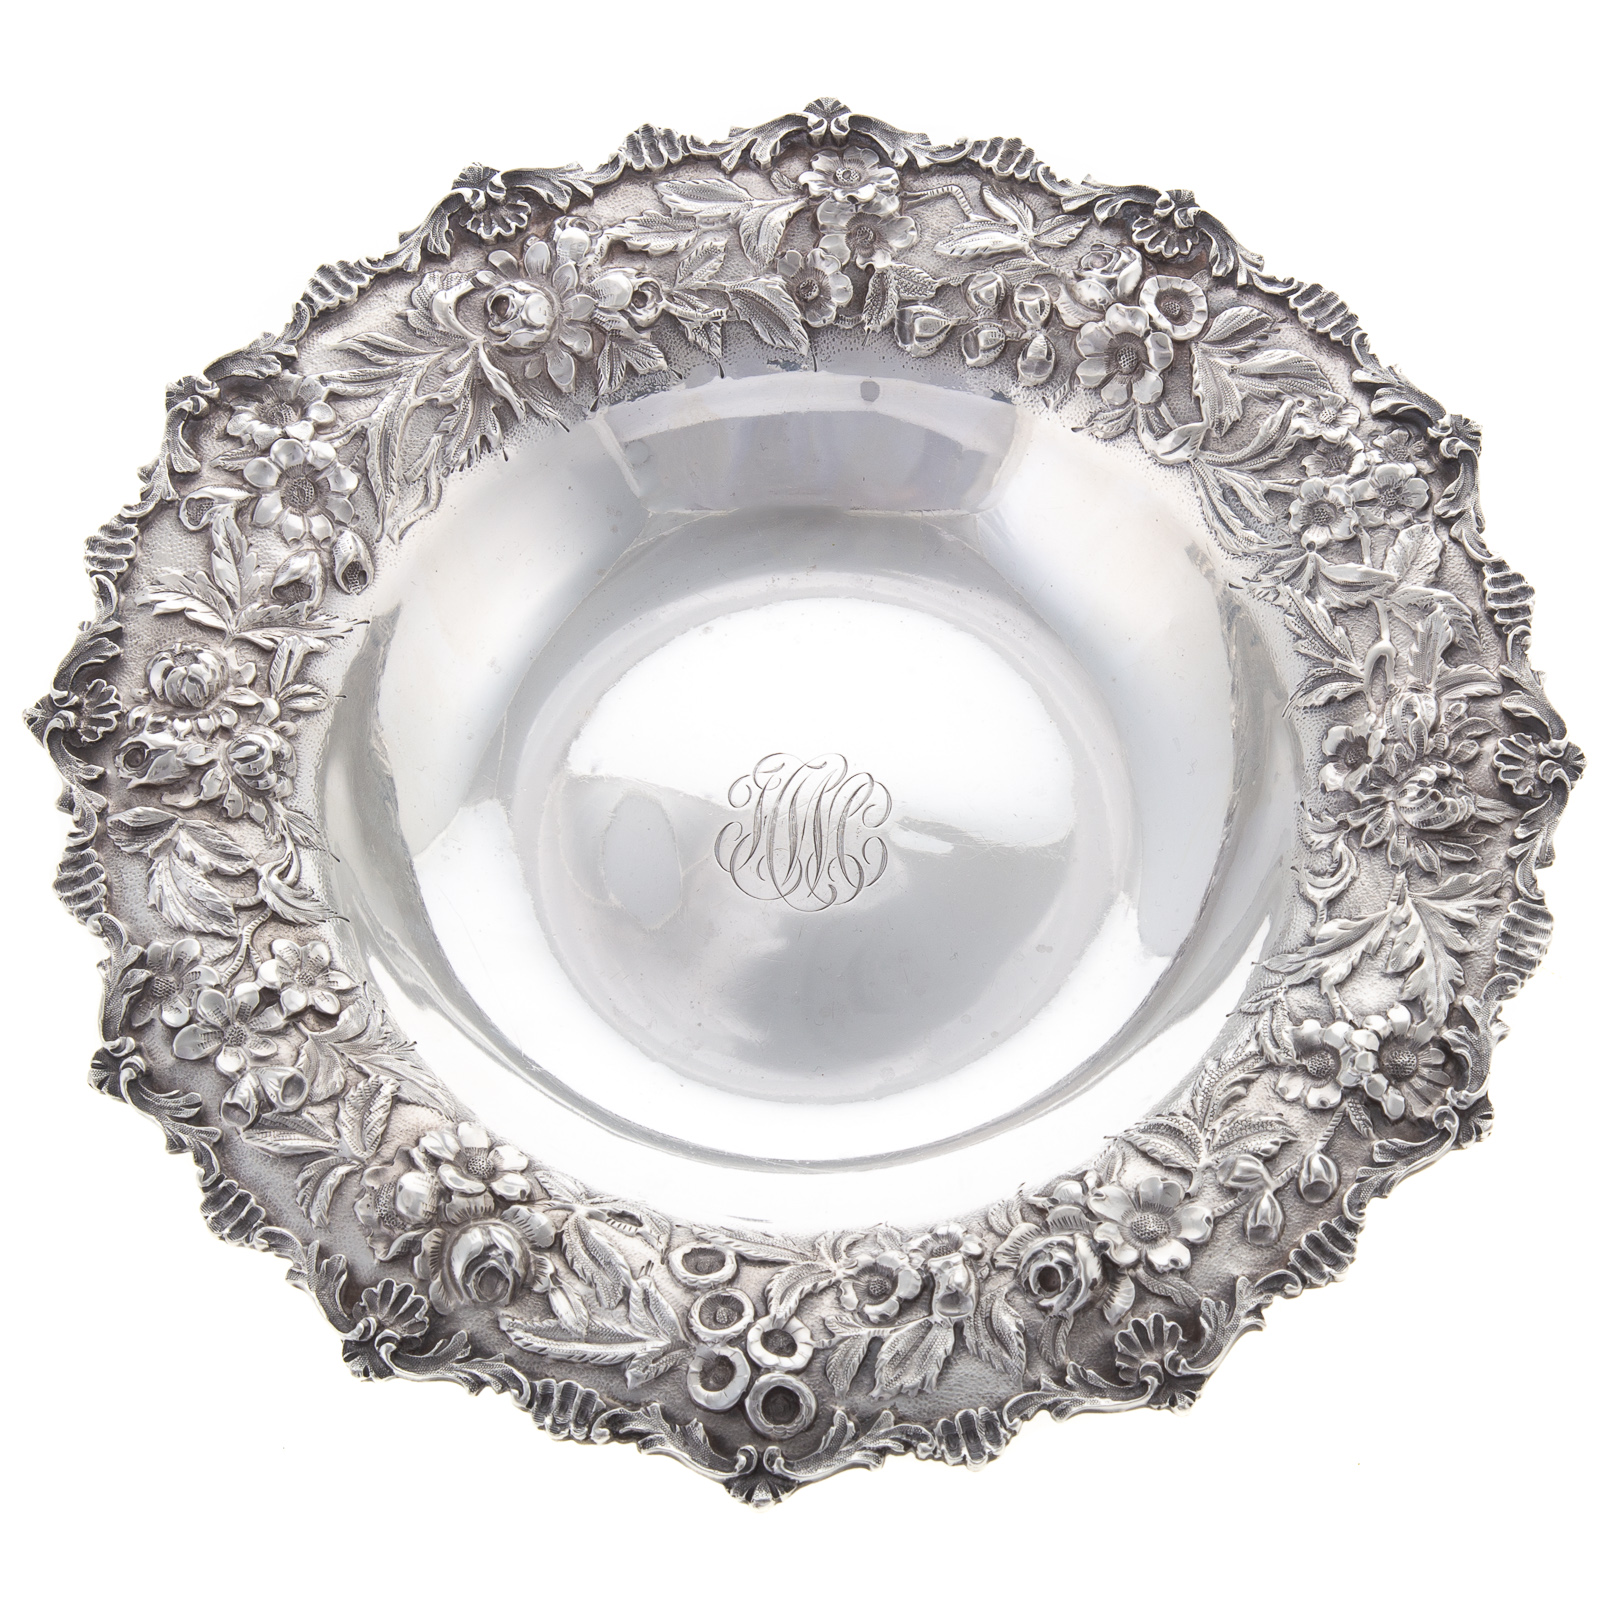 S KIRK SON INC STERLING REPOUSSE 33407a